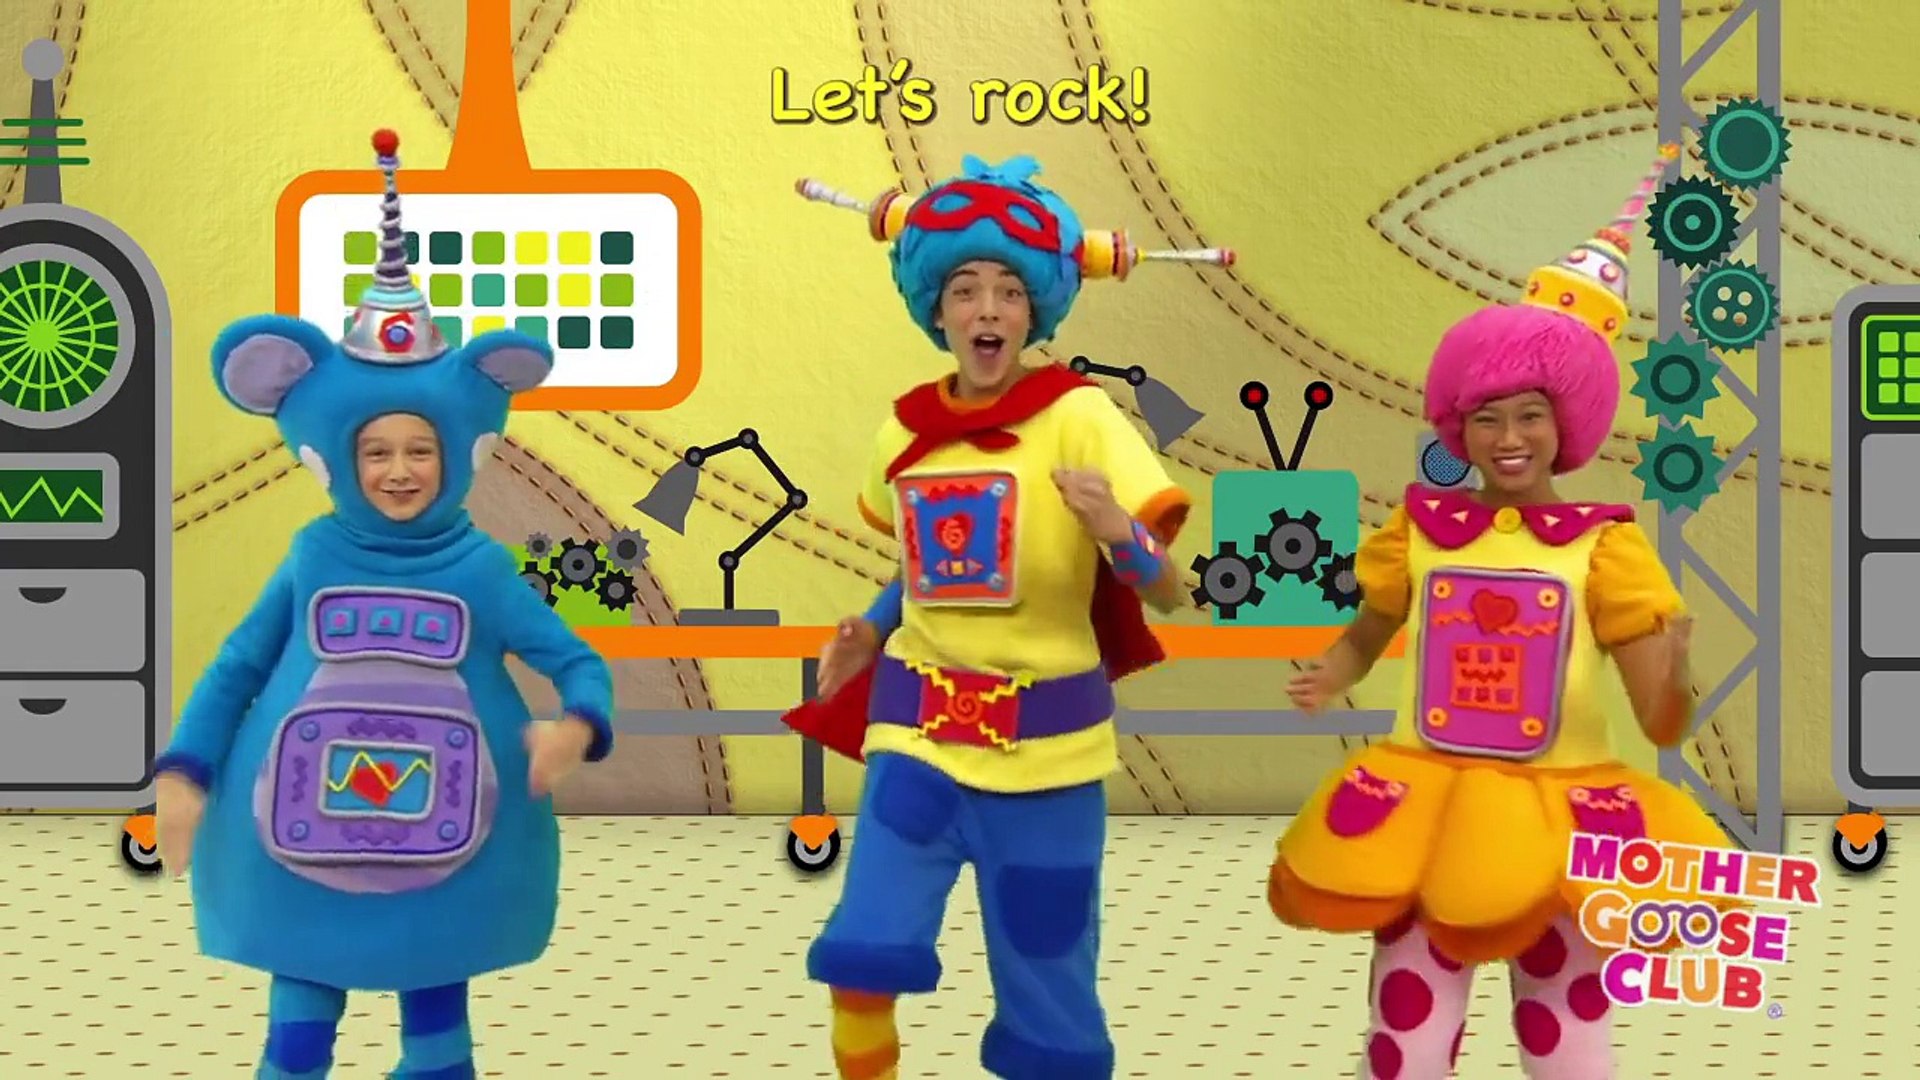 Rockin Robot - Mother Goose Club Songs for Children - Dailymotion Video